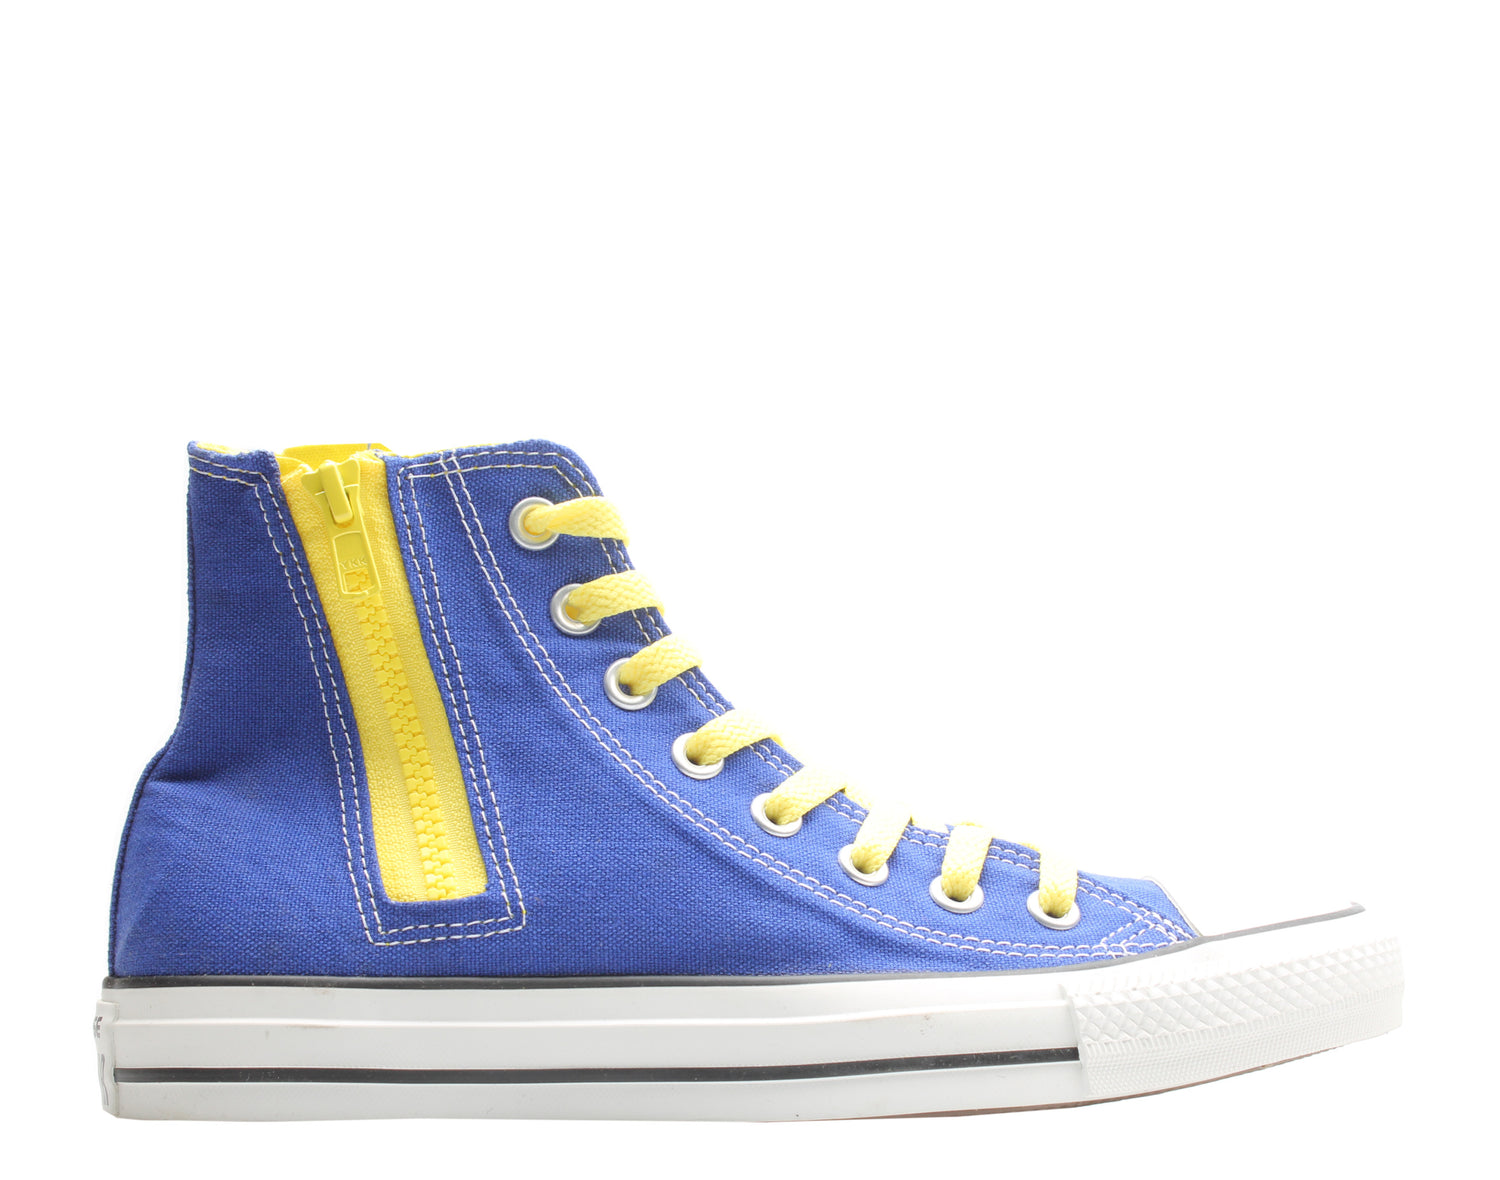 Converse Chuck Taylor All Star Side Zip Hi Sneakers